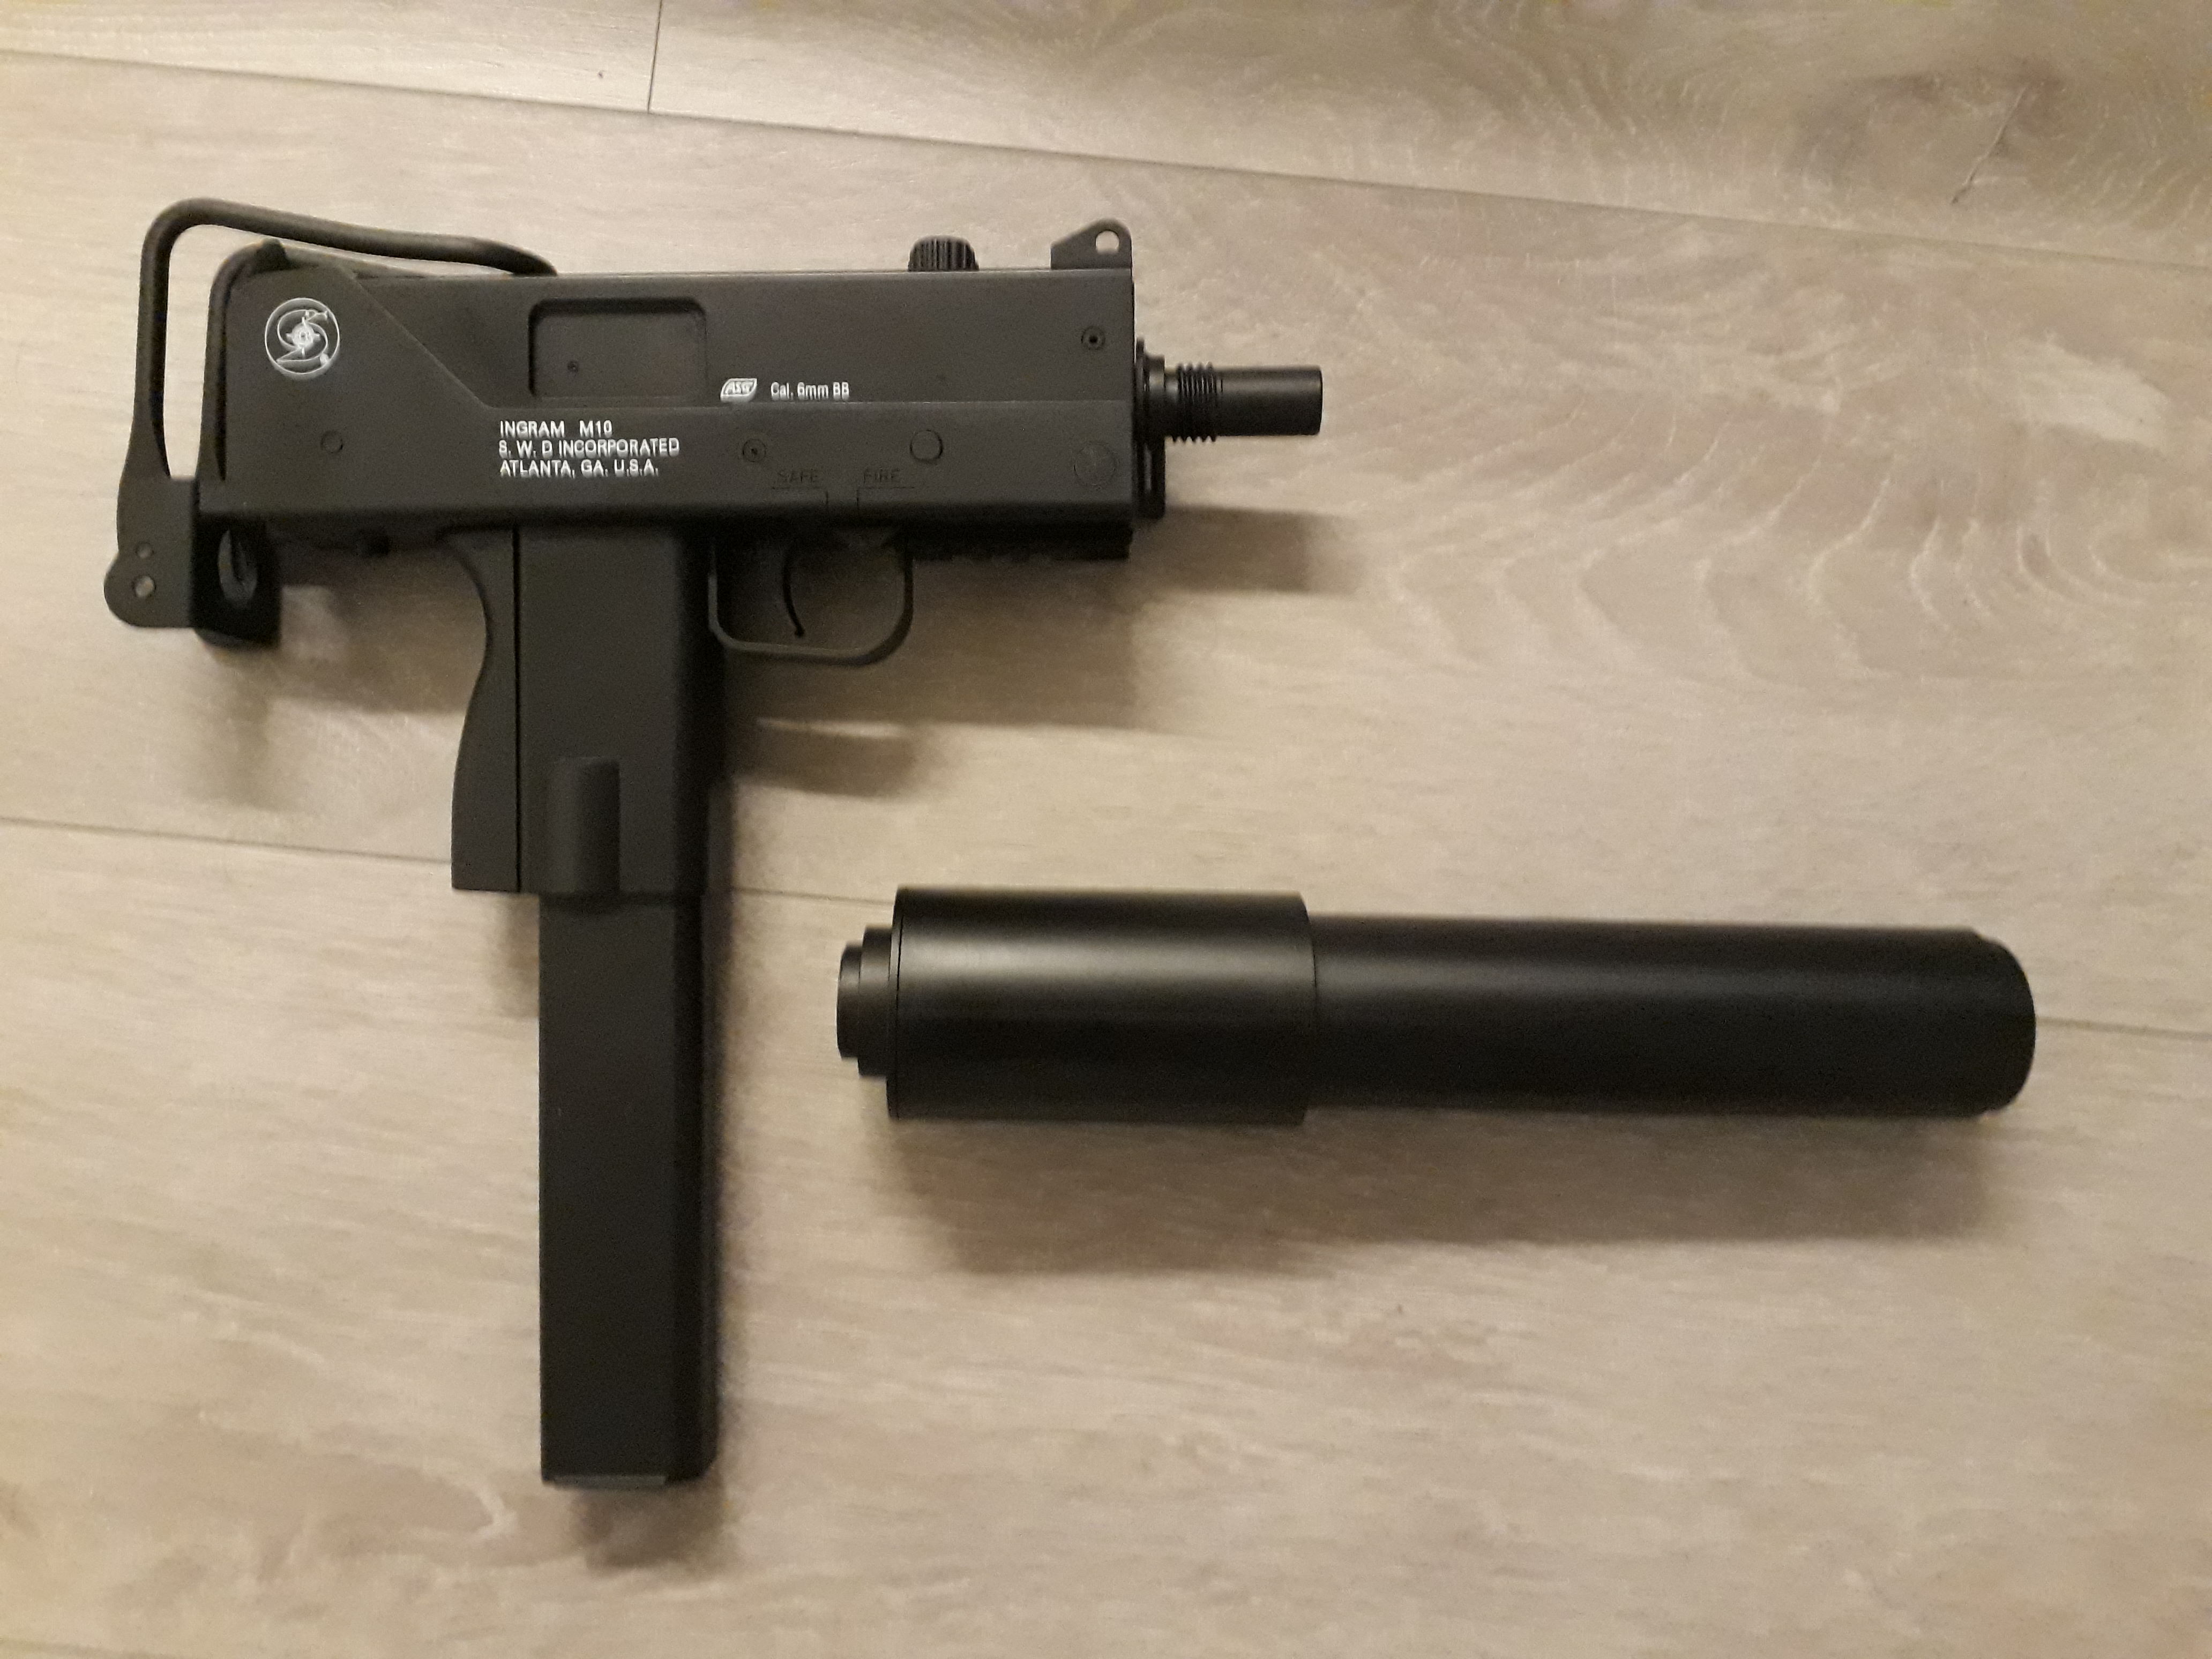 Masterpiece arms mac 10 for sale